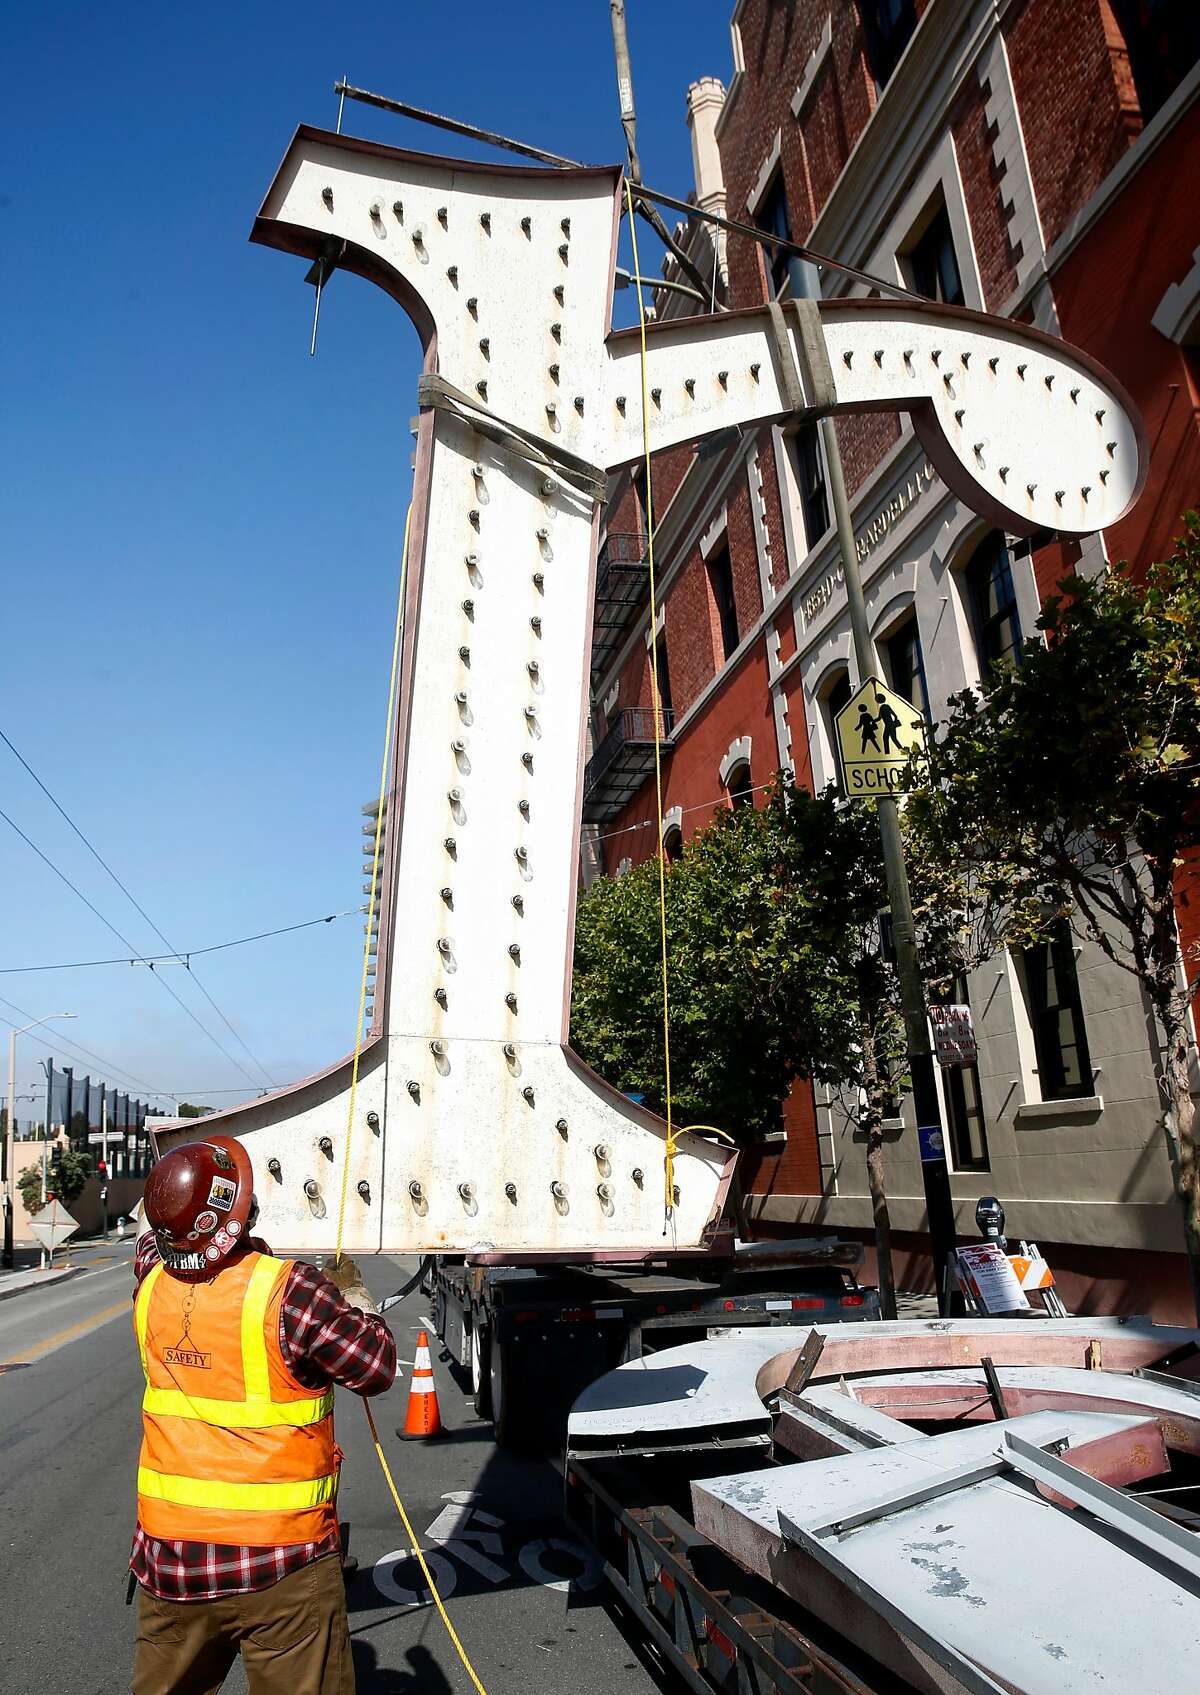 A letter from the iconic Ghirardelli Square sign is lowered onto a flatbed truck after it’s removed from the roof in San Francisco, Calif. on Wednesday, July 1, 2020. The aging illuminated characters will be replicated and replaced with new ones.